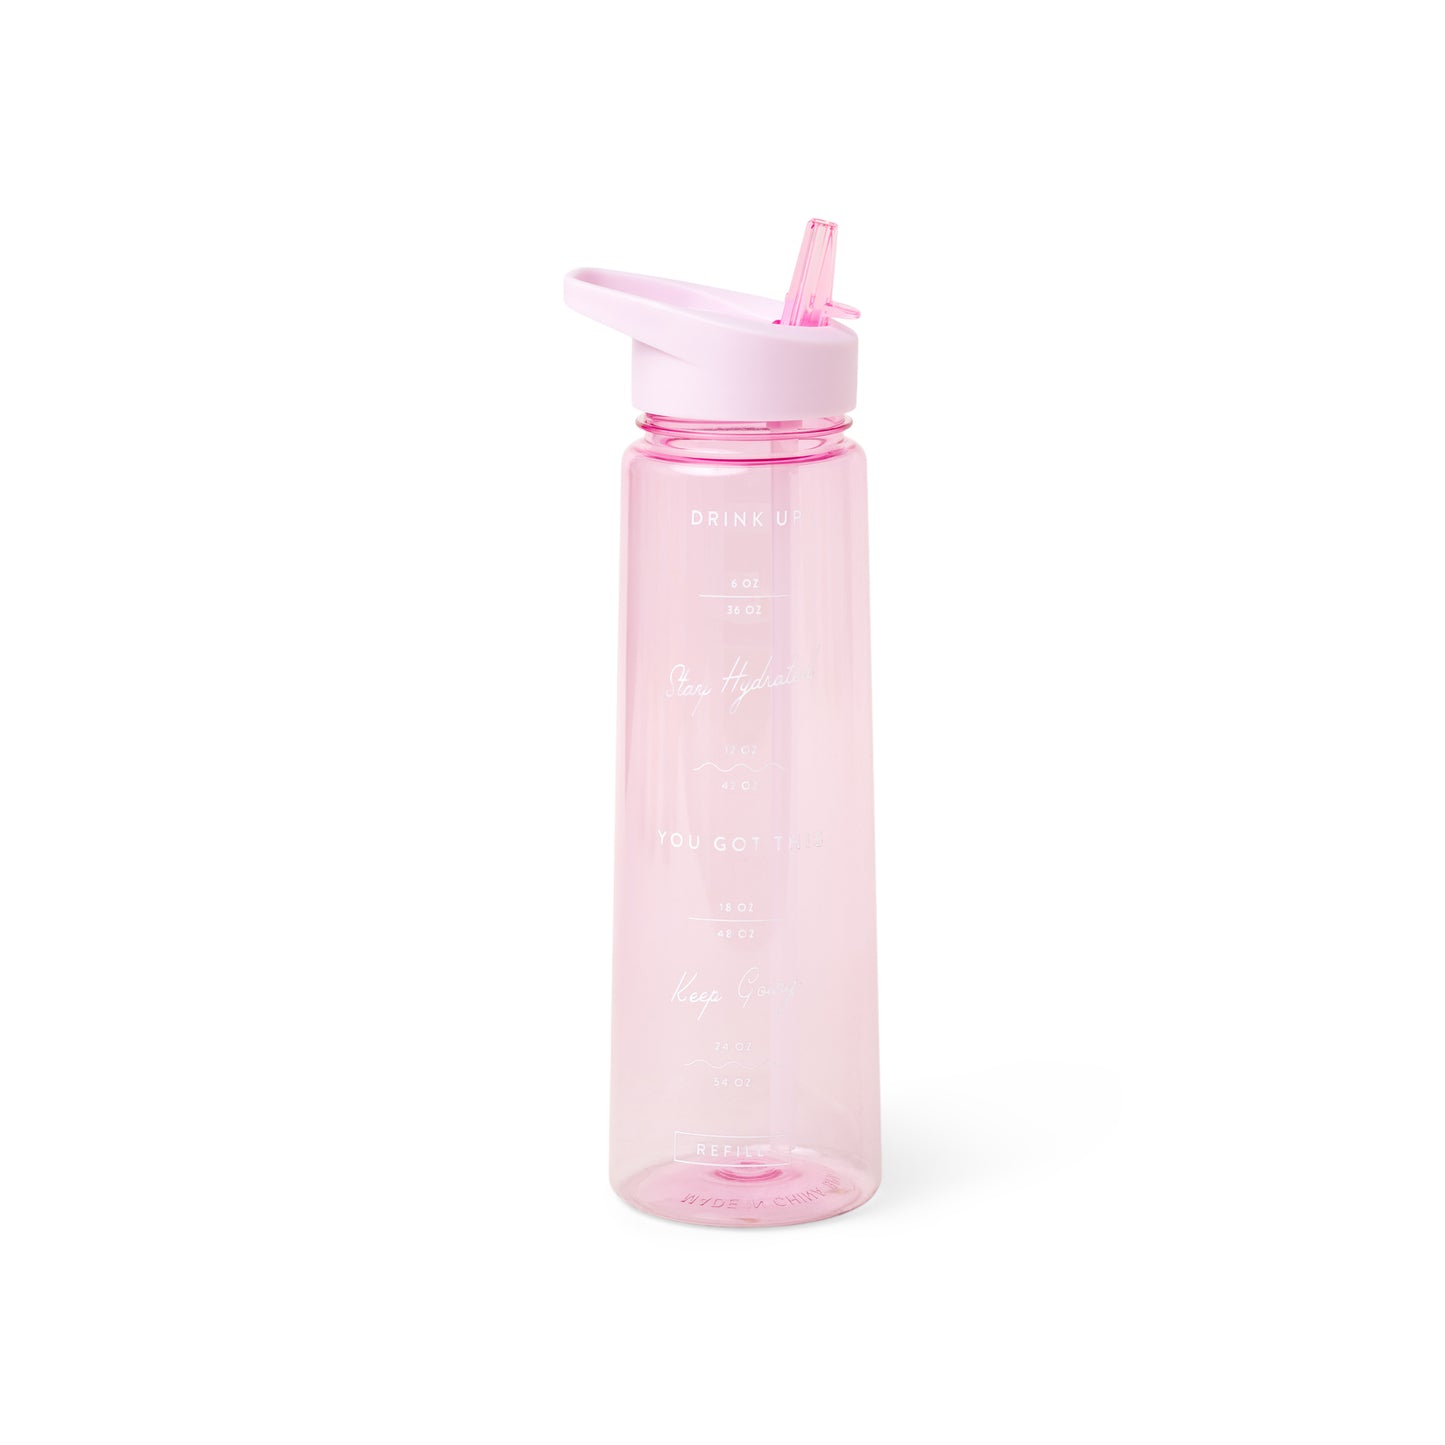 Wellness Waterbottle with Tracker 30 fl oz. - Lilac